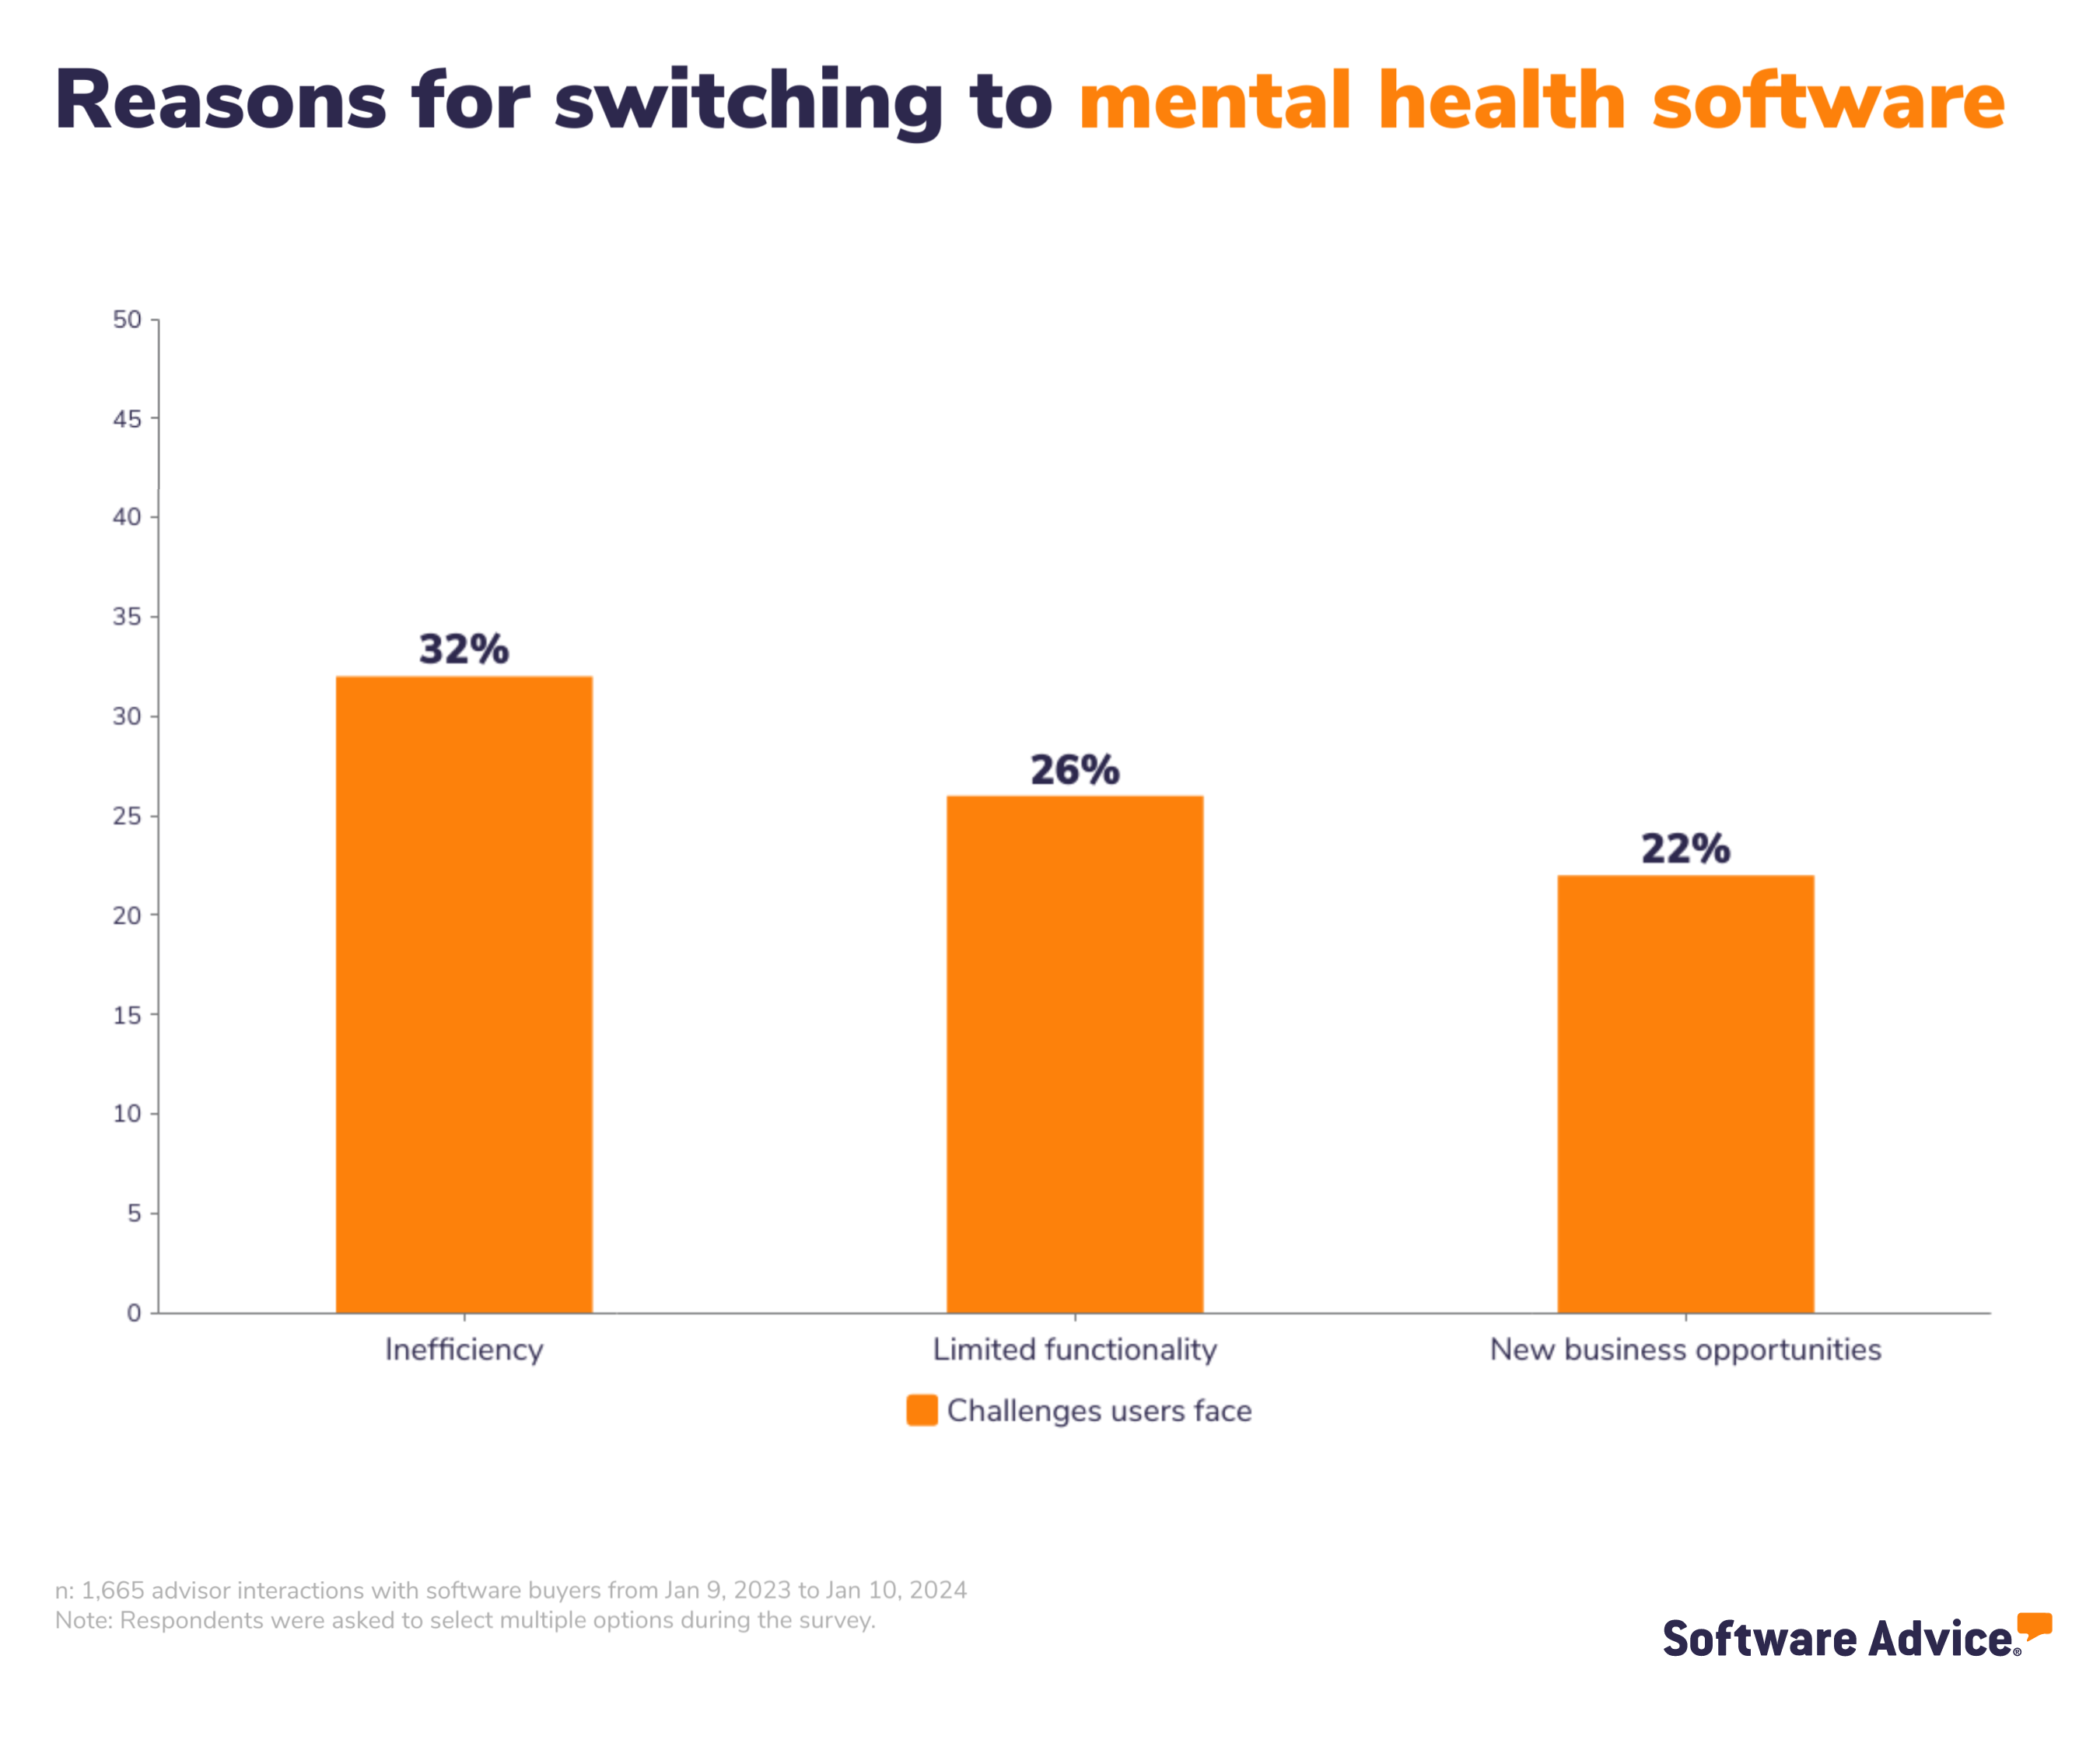 Reasons for switching to mental health software